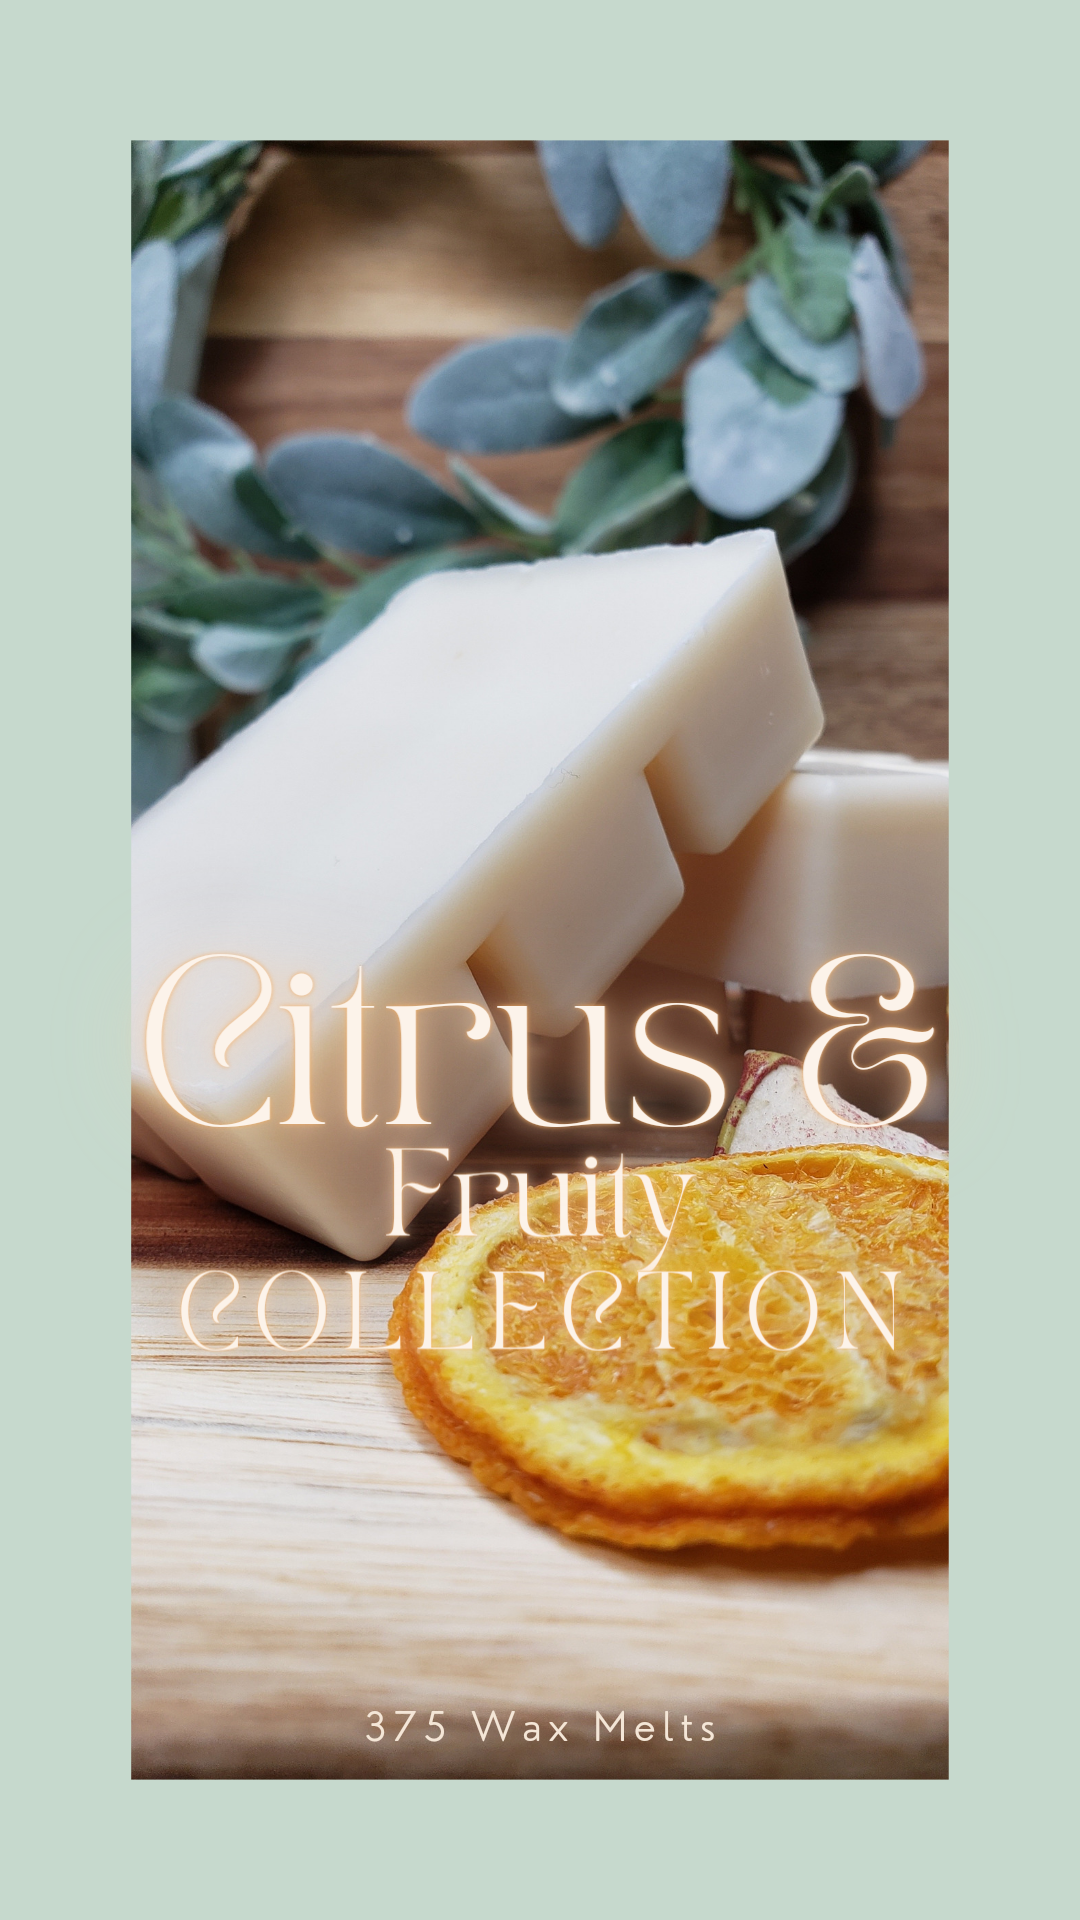 Citrus and Fruity Collection